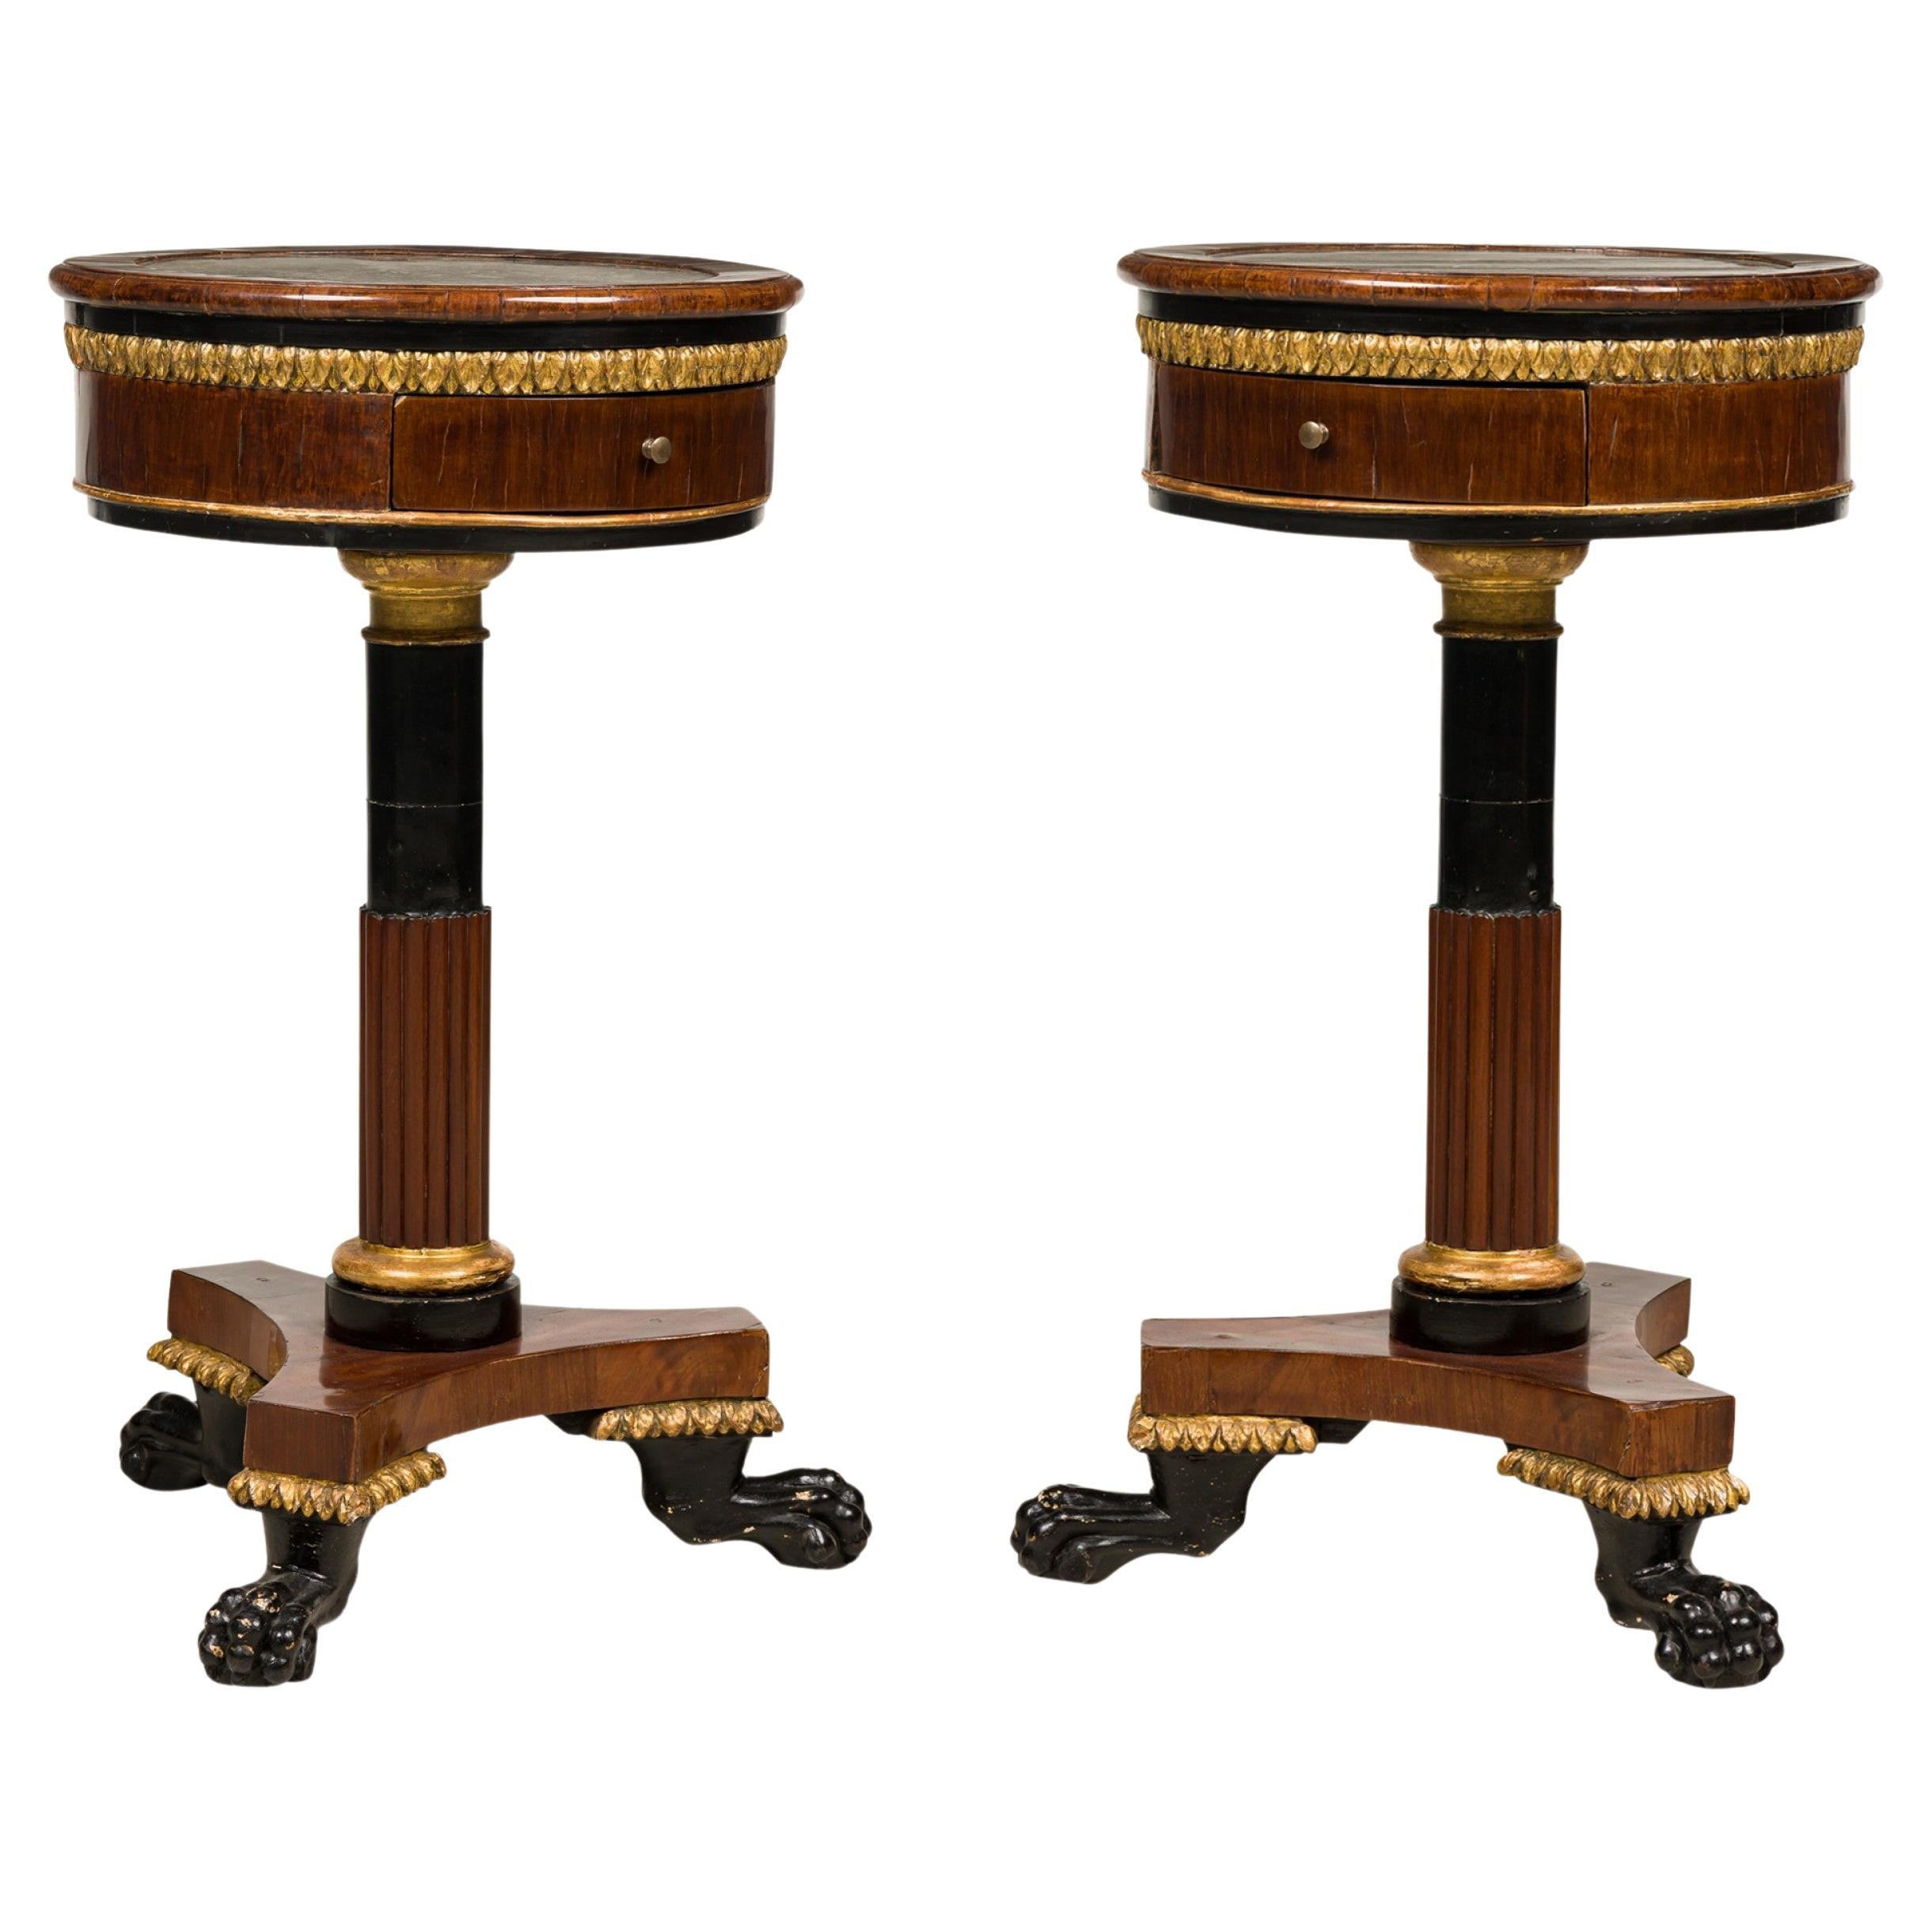 Pair of Italian Neoclassicalal Mahogany and Marble Gueirdon End Table For Sale